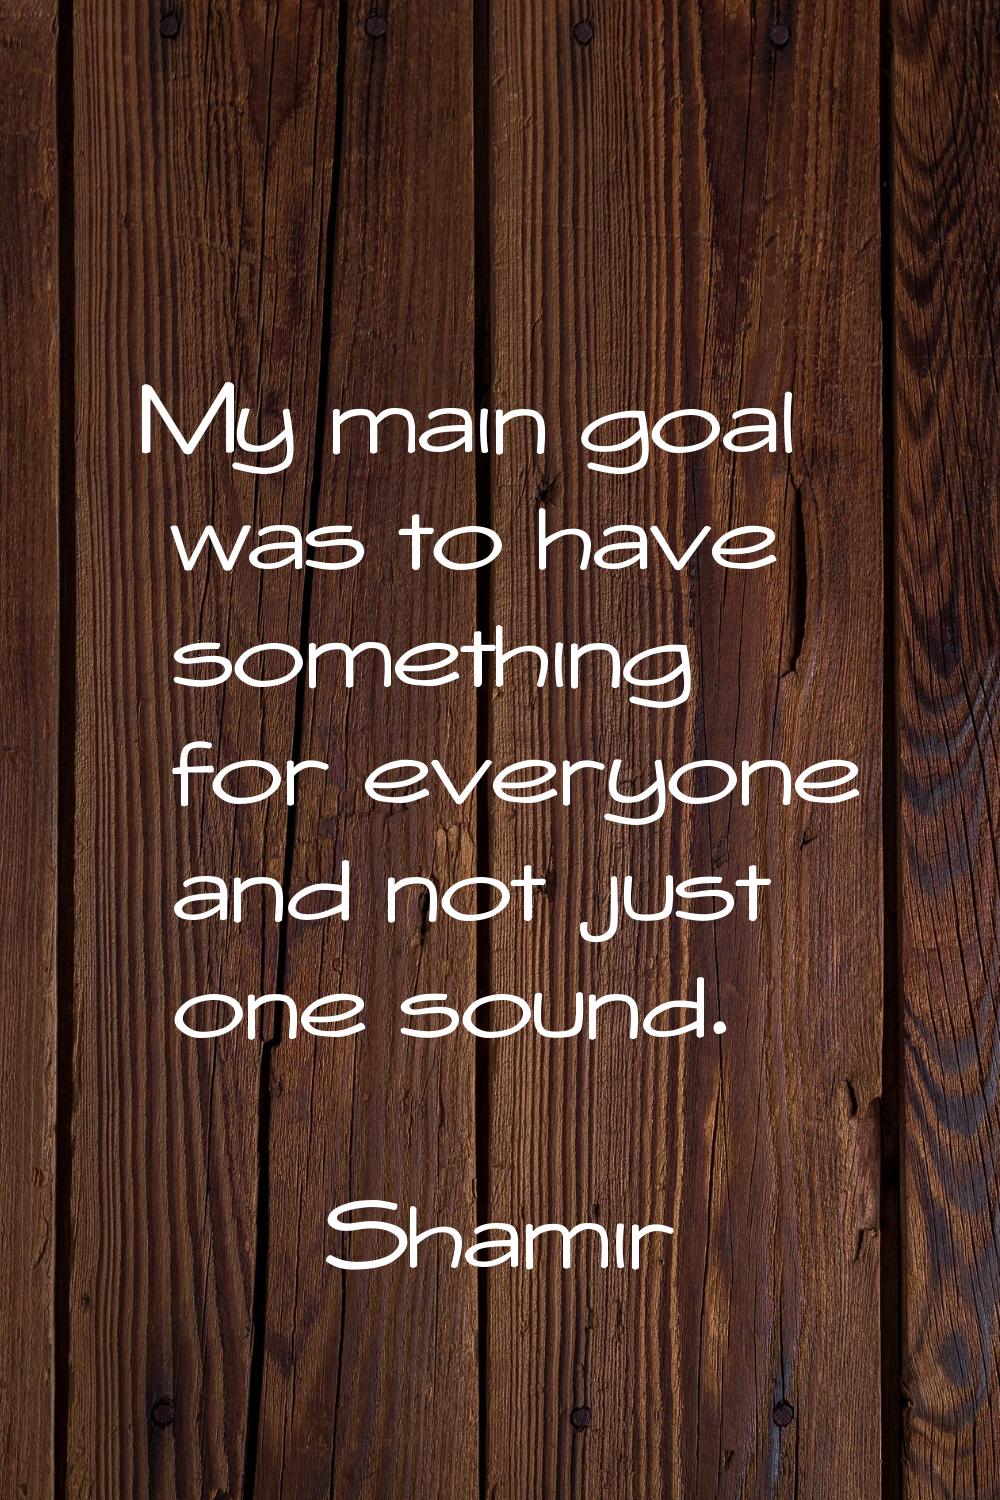 My main goal was to have something for everyone and not just one sound.